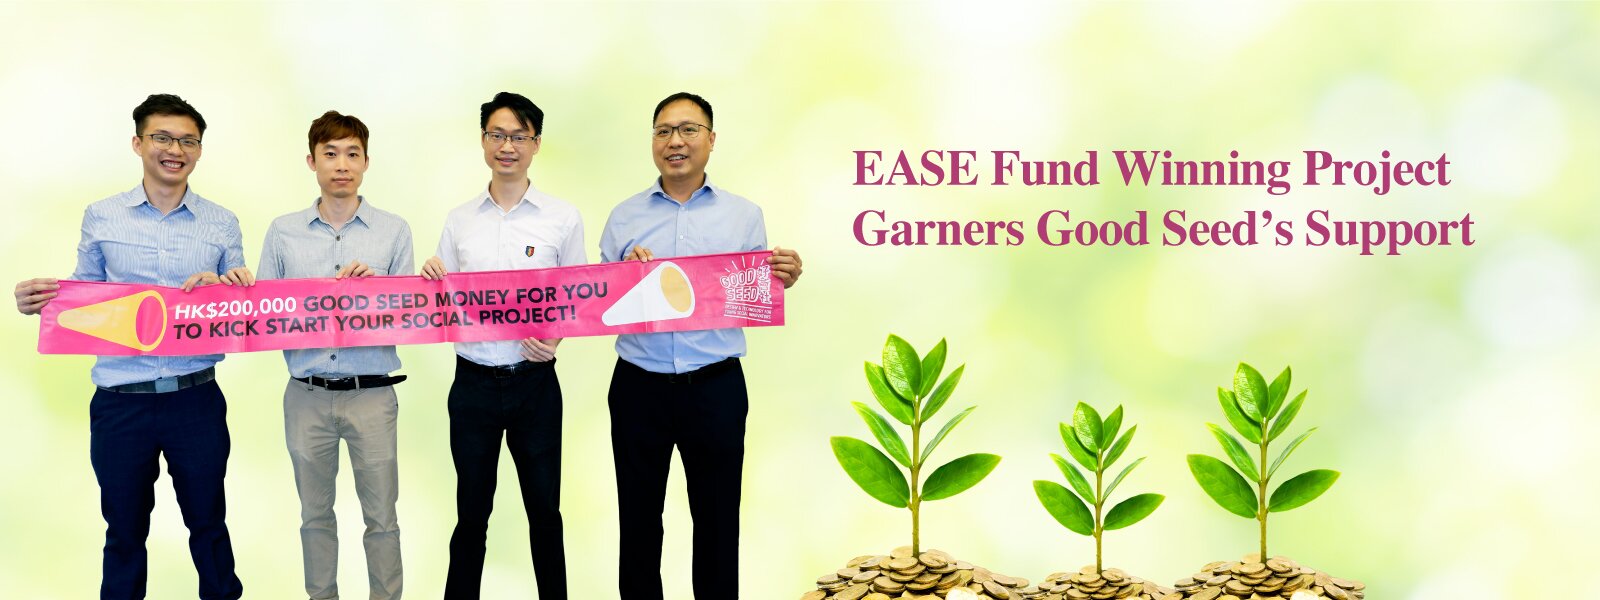 EASE Fund Winning Project Garners Good Seed’s Support